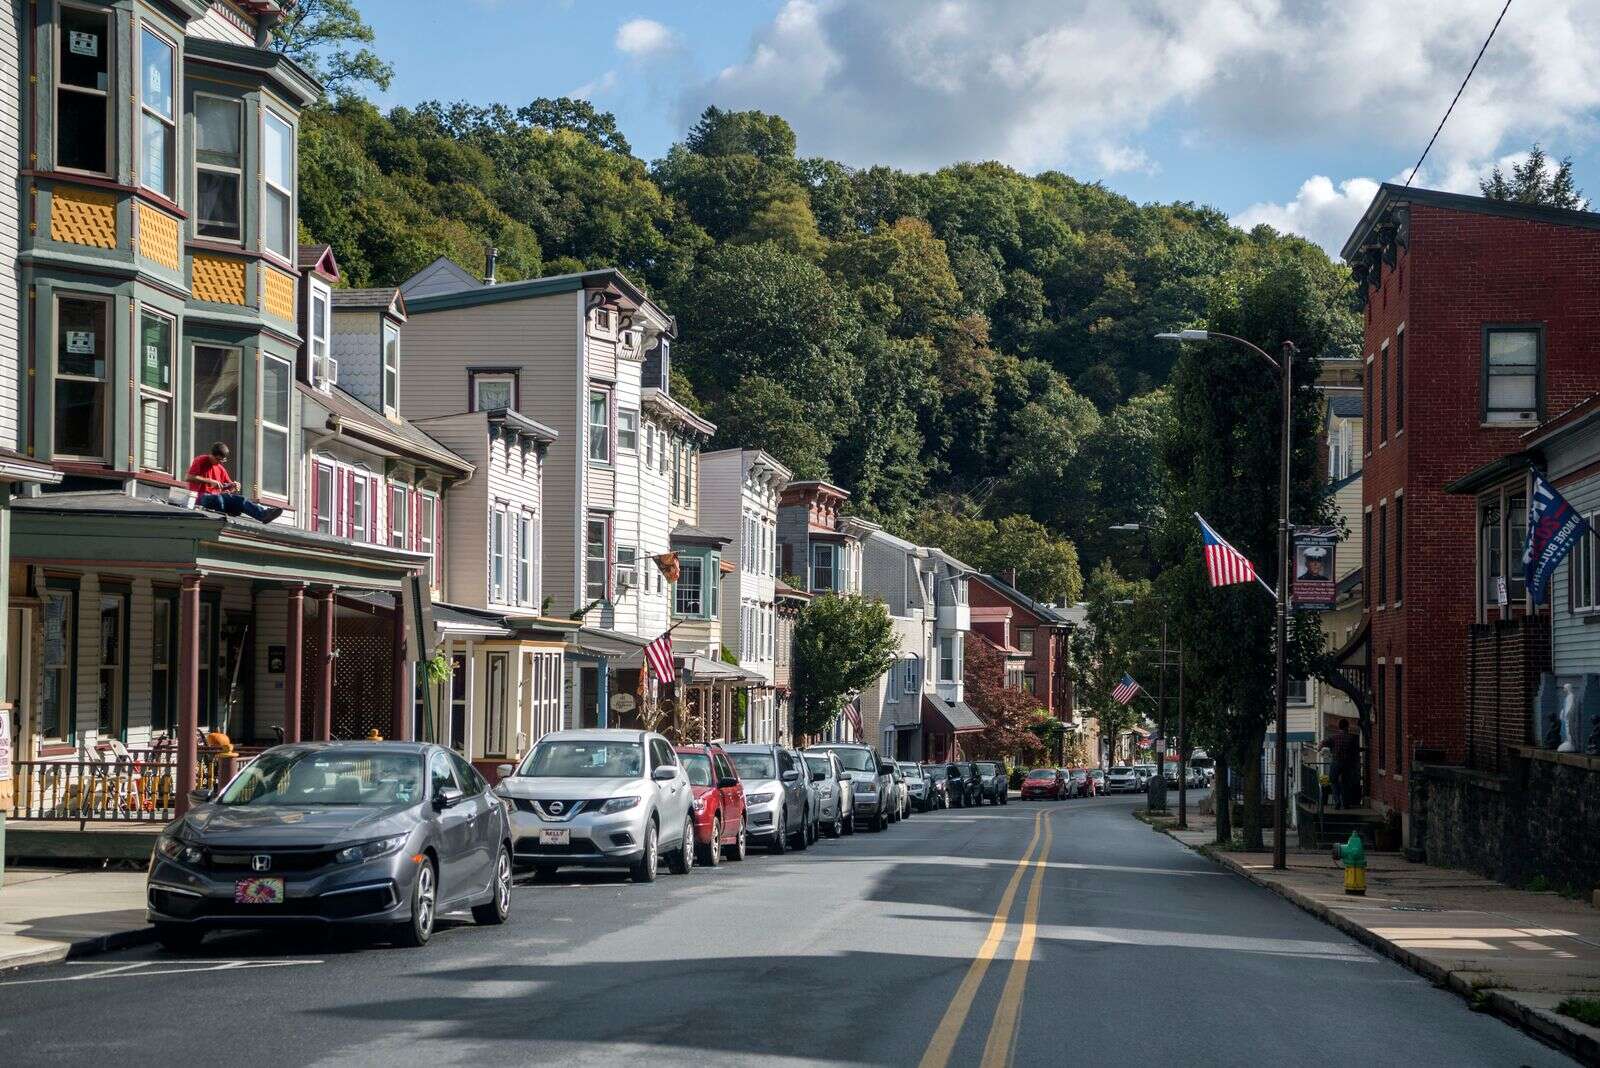 Permit parking on hold in Jim Thorpe – Times News Online